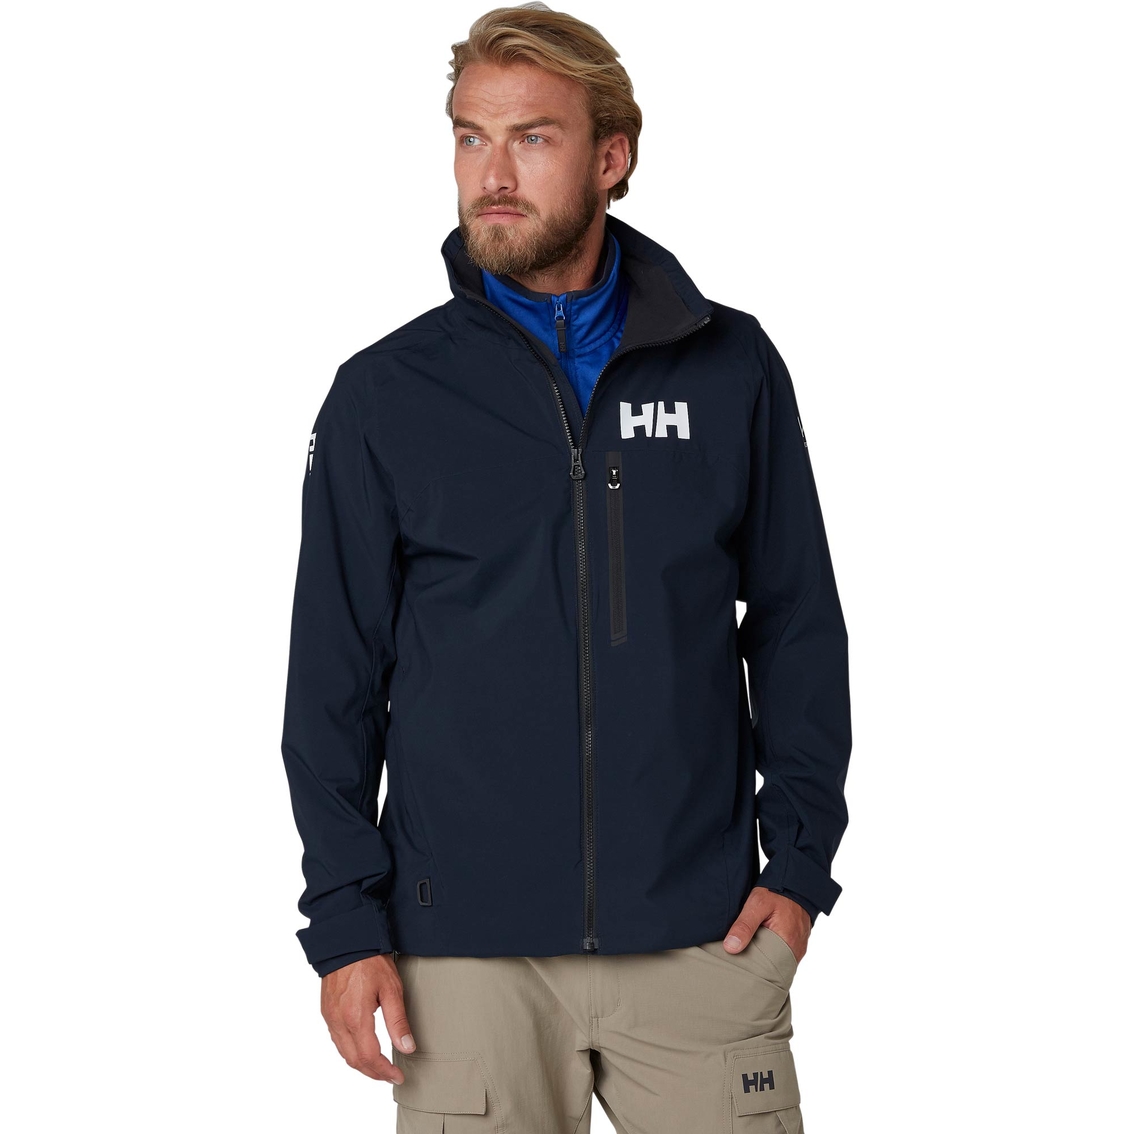 Helly Hansen Racing Jacket | Jackets | Clothing & Accessories | Shop ...